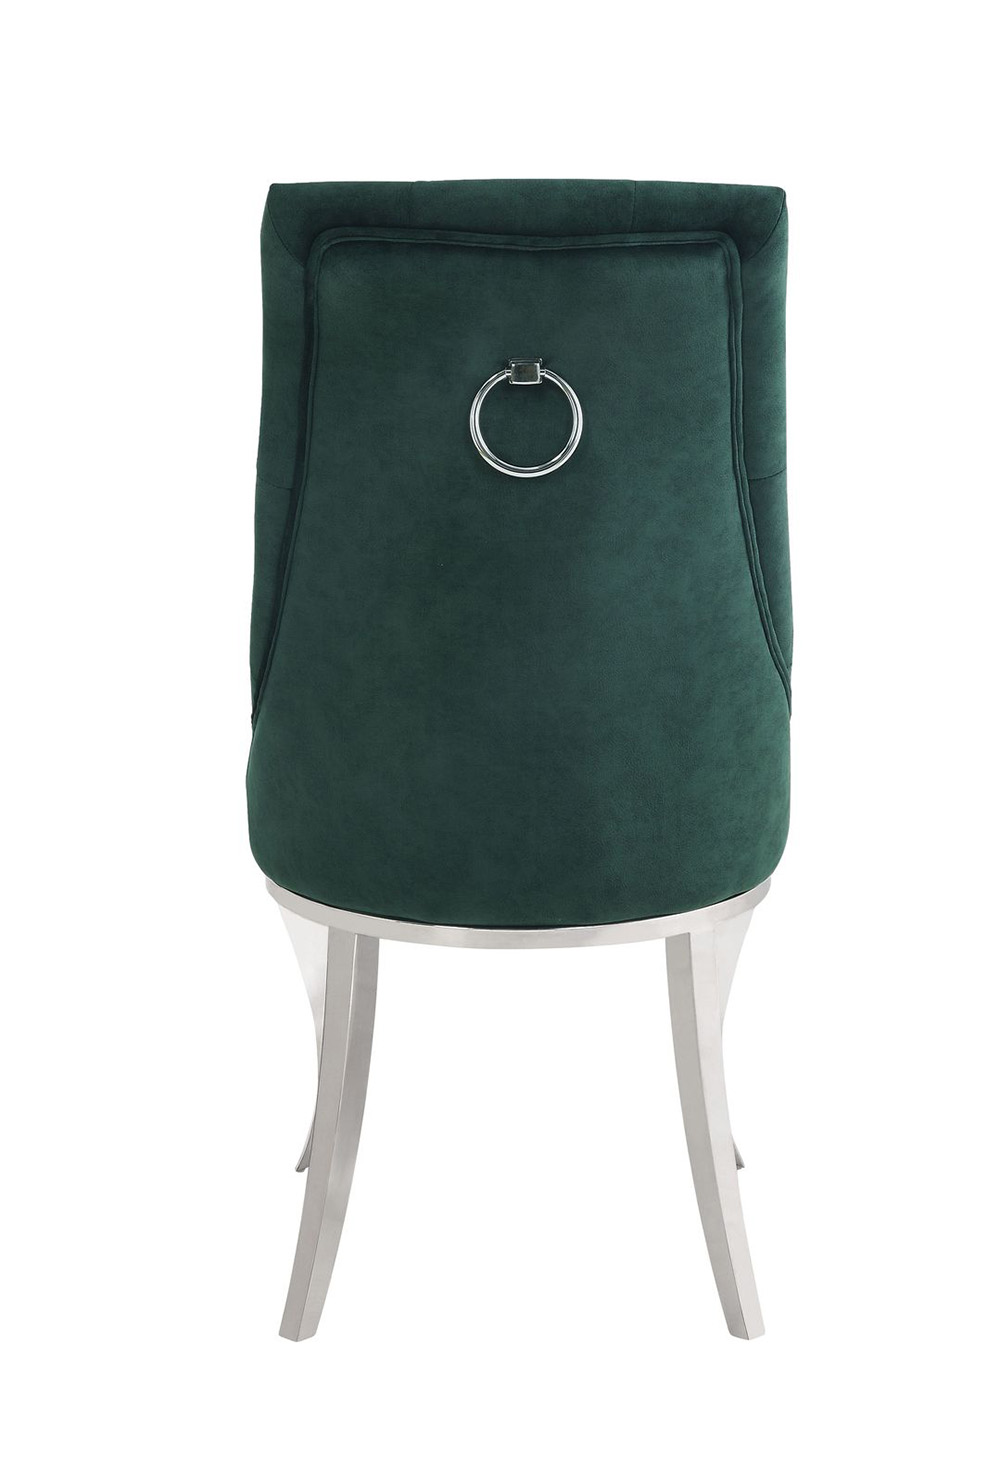 ACME Dekel Fabric Upholstered Dining Chair Set of 2, with Button Tufted Backrest, and Metal Legs, for Restaurant, Cafe, Tavern, Office, Living Room - Green